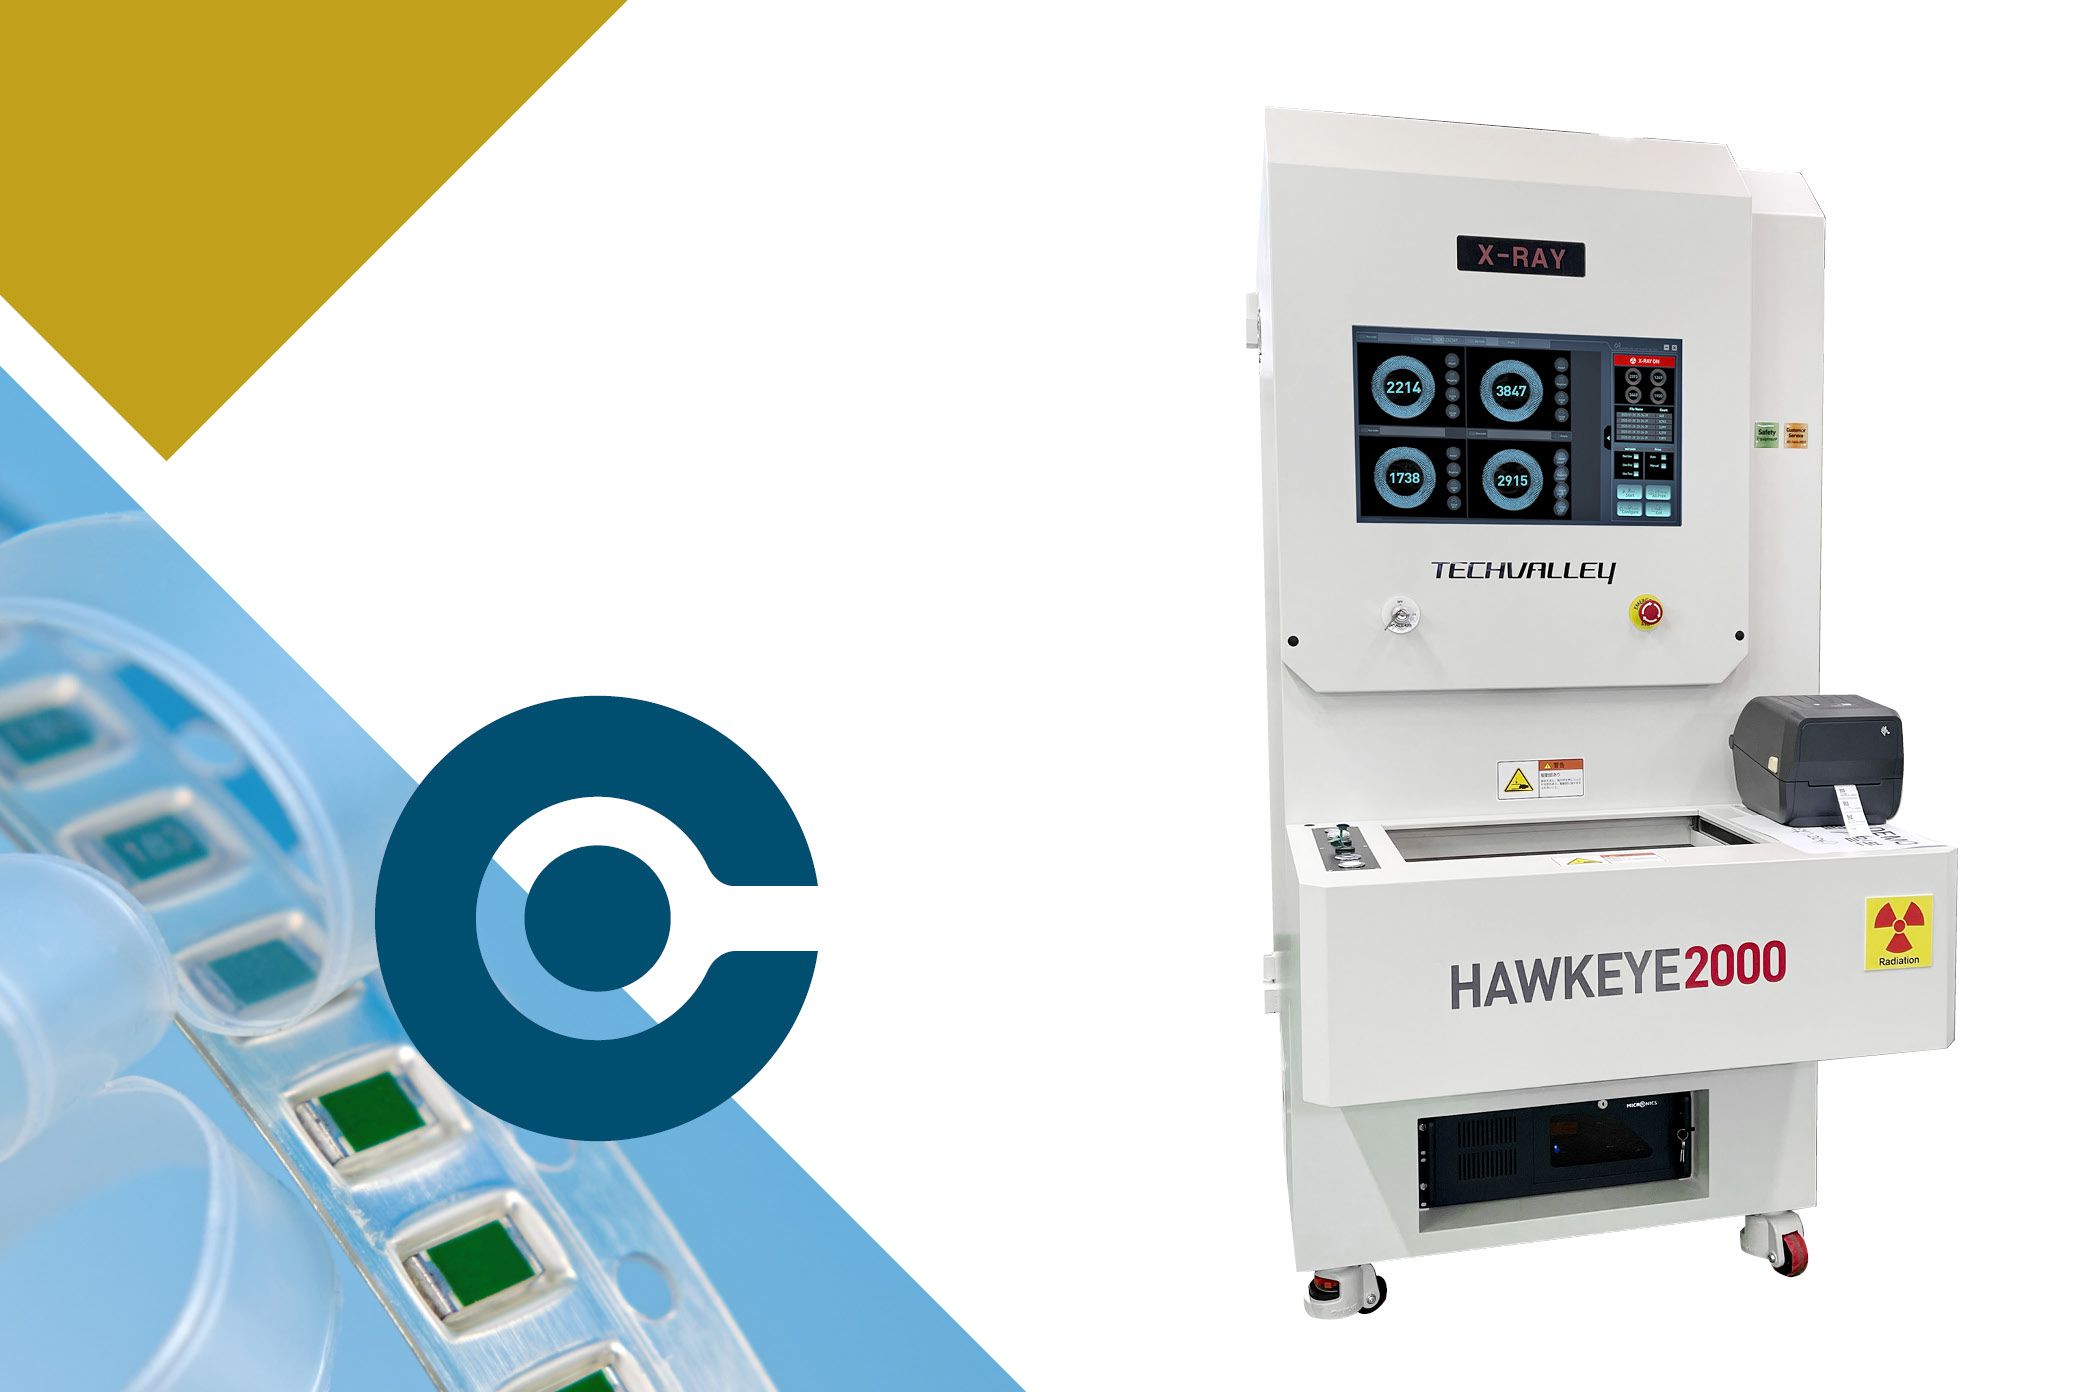 The X-ray component counter Hawkeye 2000 supports PCB assemblies